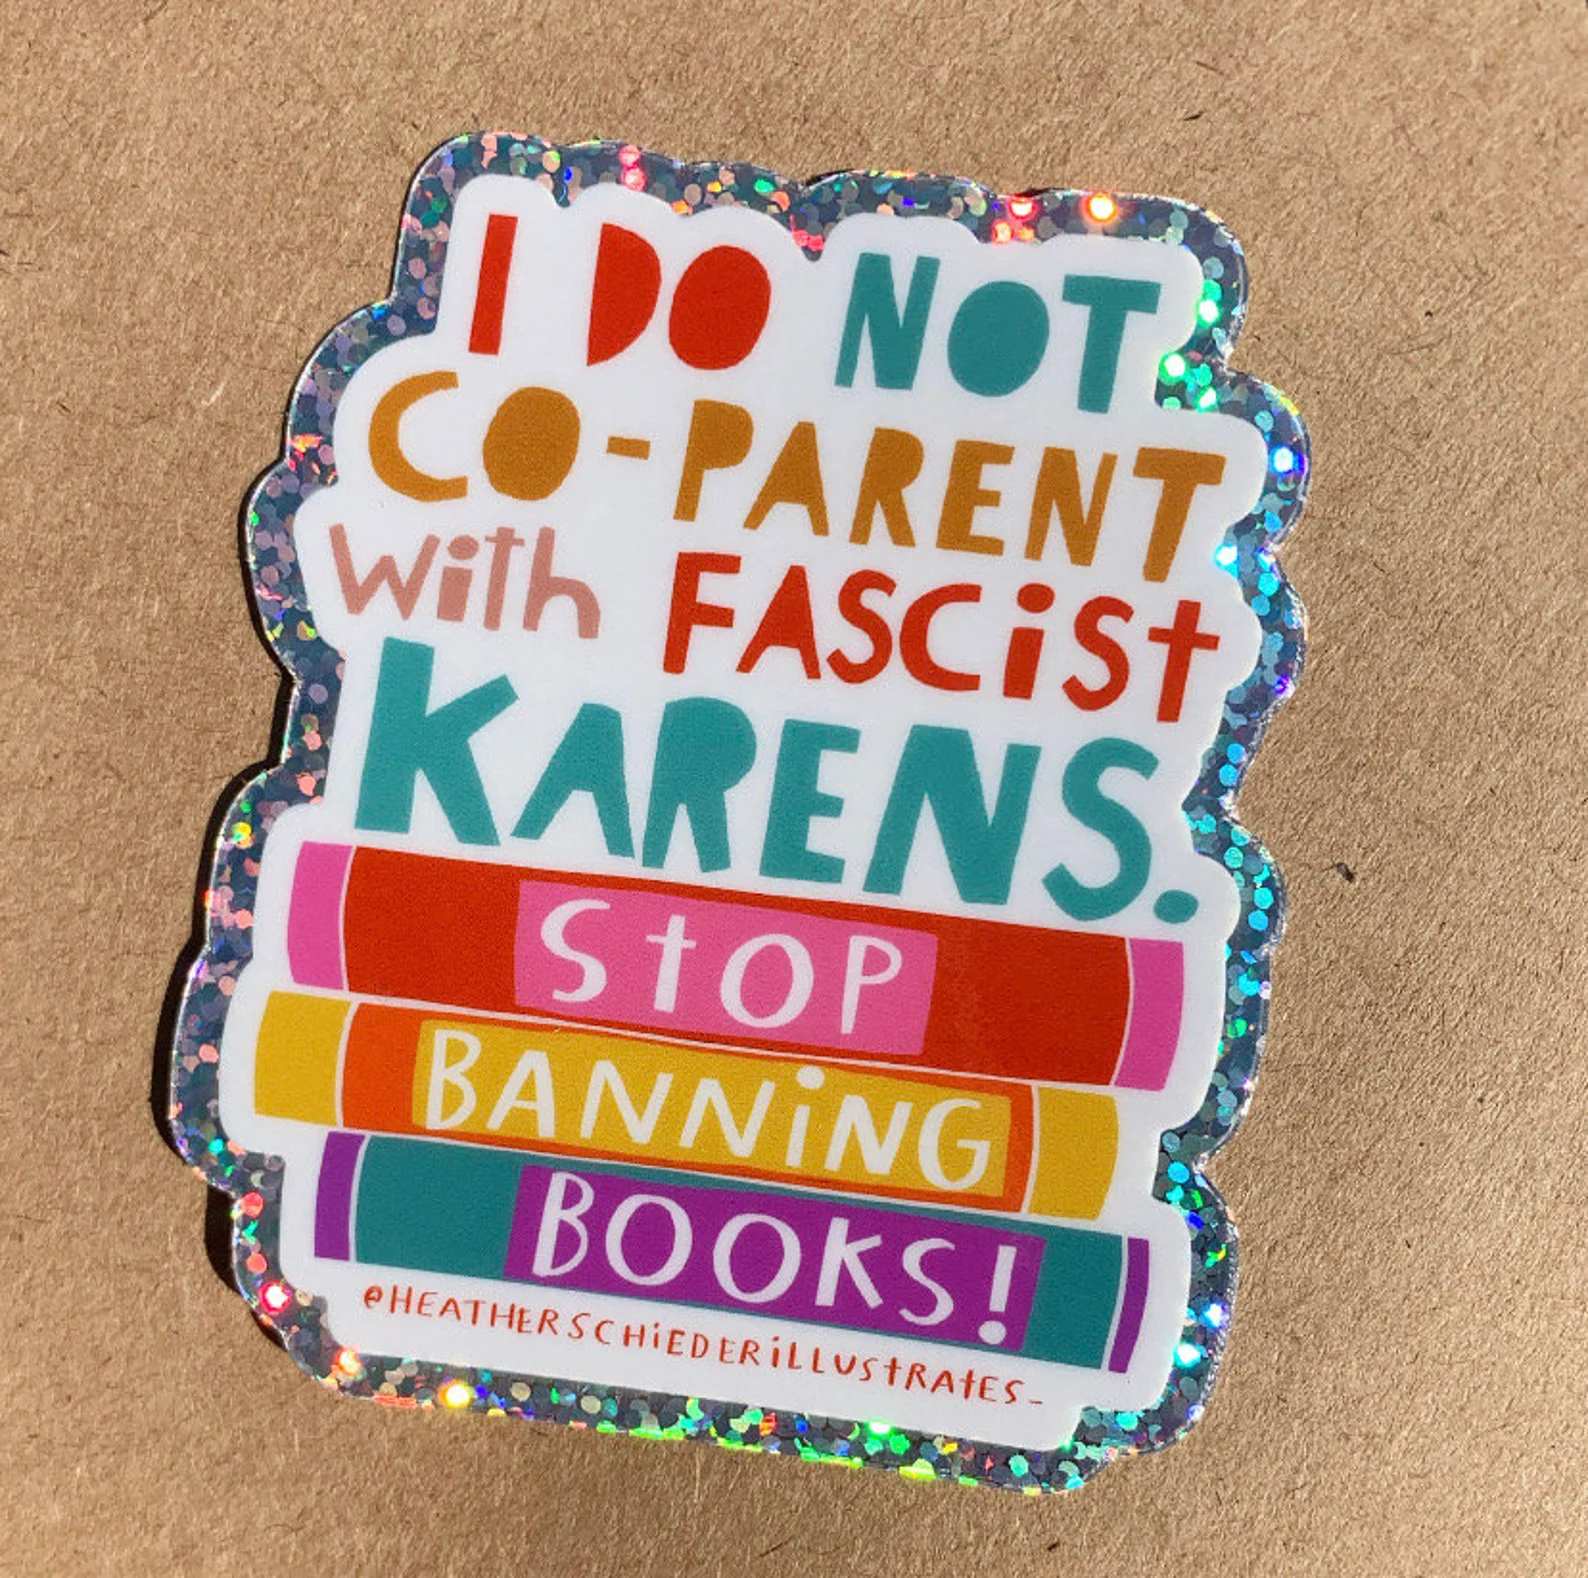 holographic sticker that reads "I do not co-parent with fascist Karens."